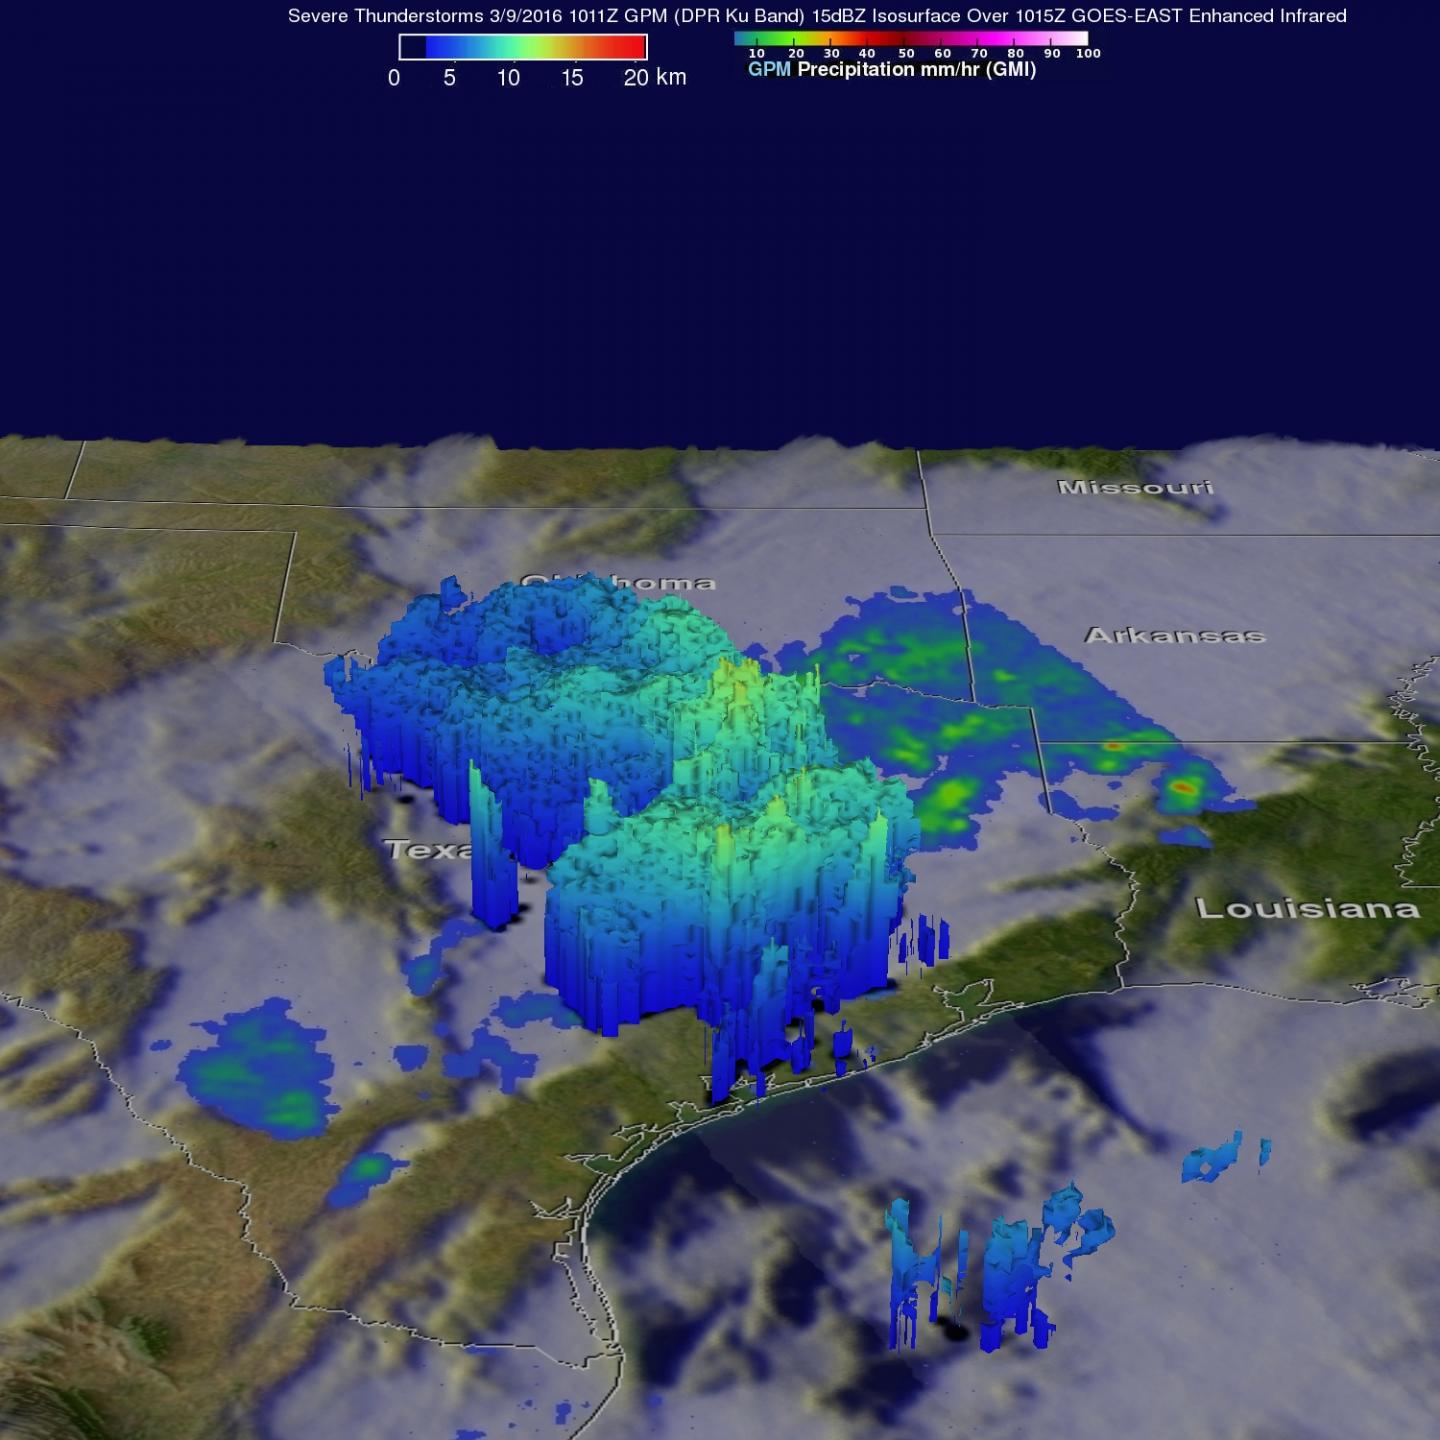 Gpm Measured Rain Falling from Powerful Storms